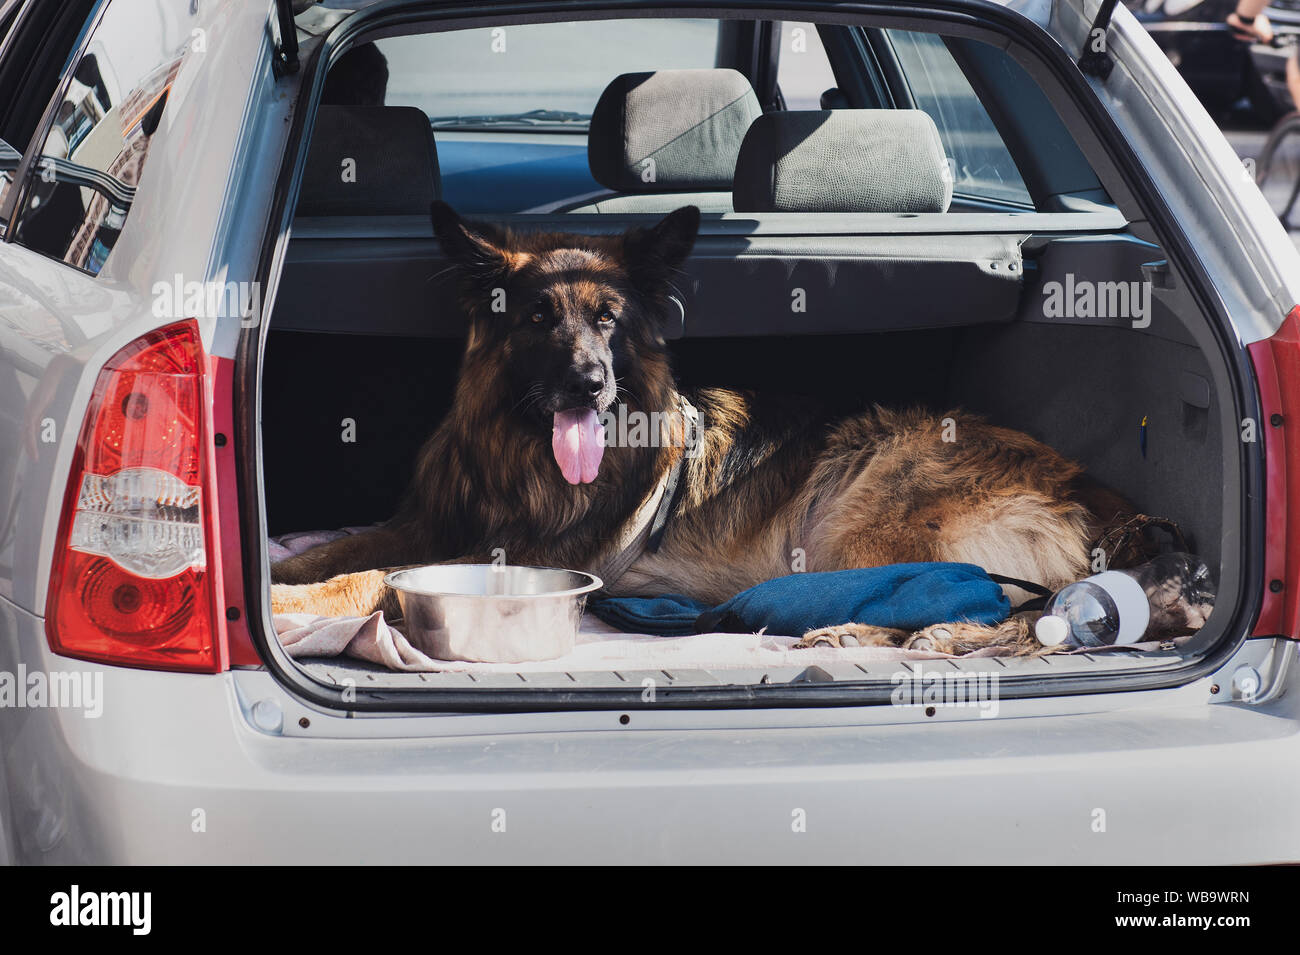 Beautiful German shepherd sitting in the trunk of a car with opened mouth. Dog shows tongue. Trip with dog. On the way to the vet. Stock Photo